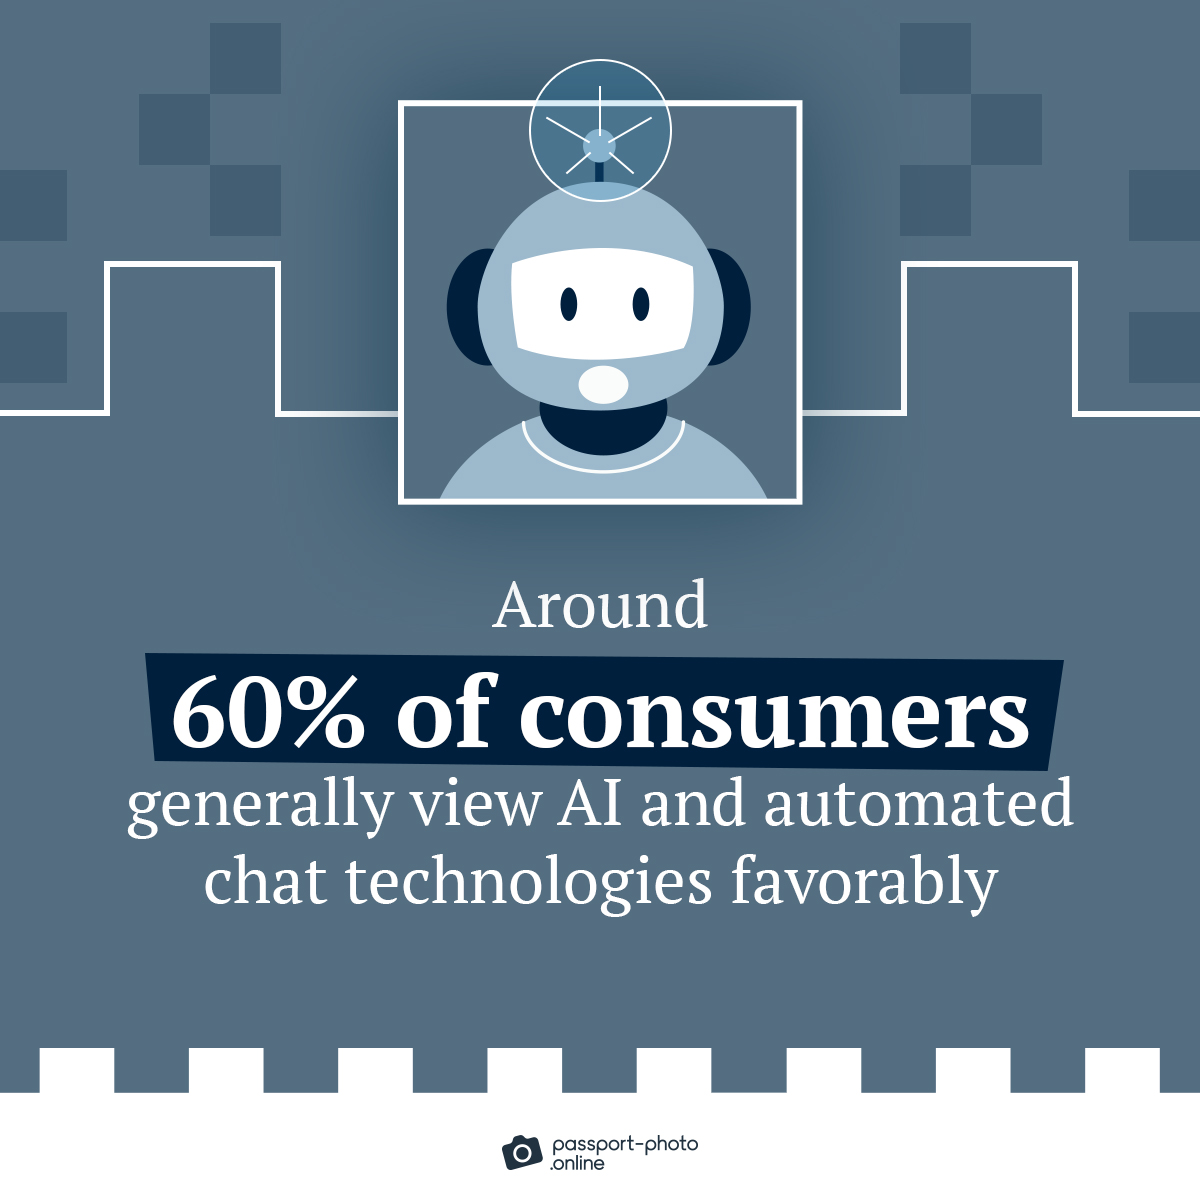 around 60% of consumers hold a favorable view of chatbots